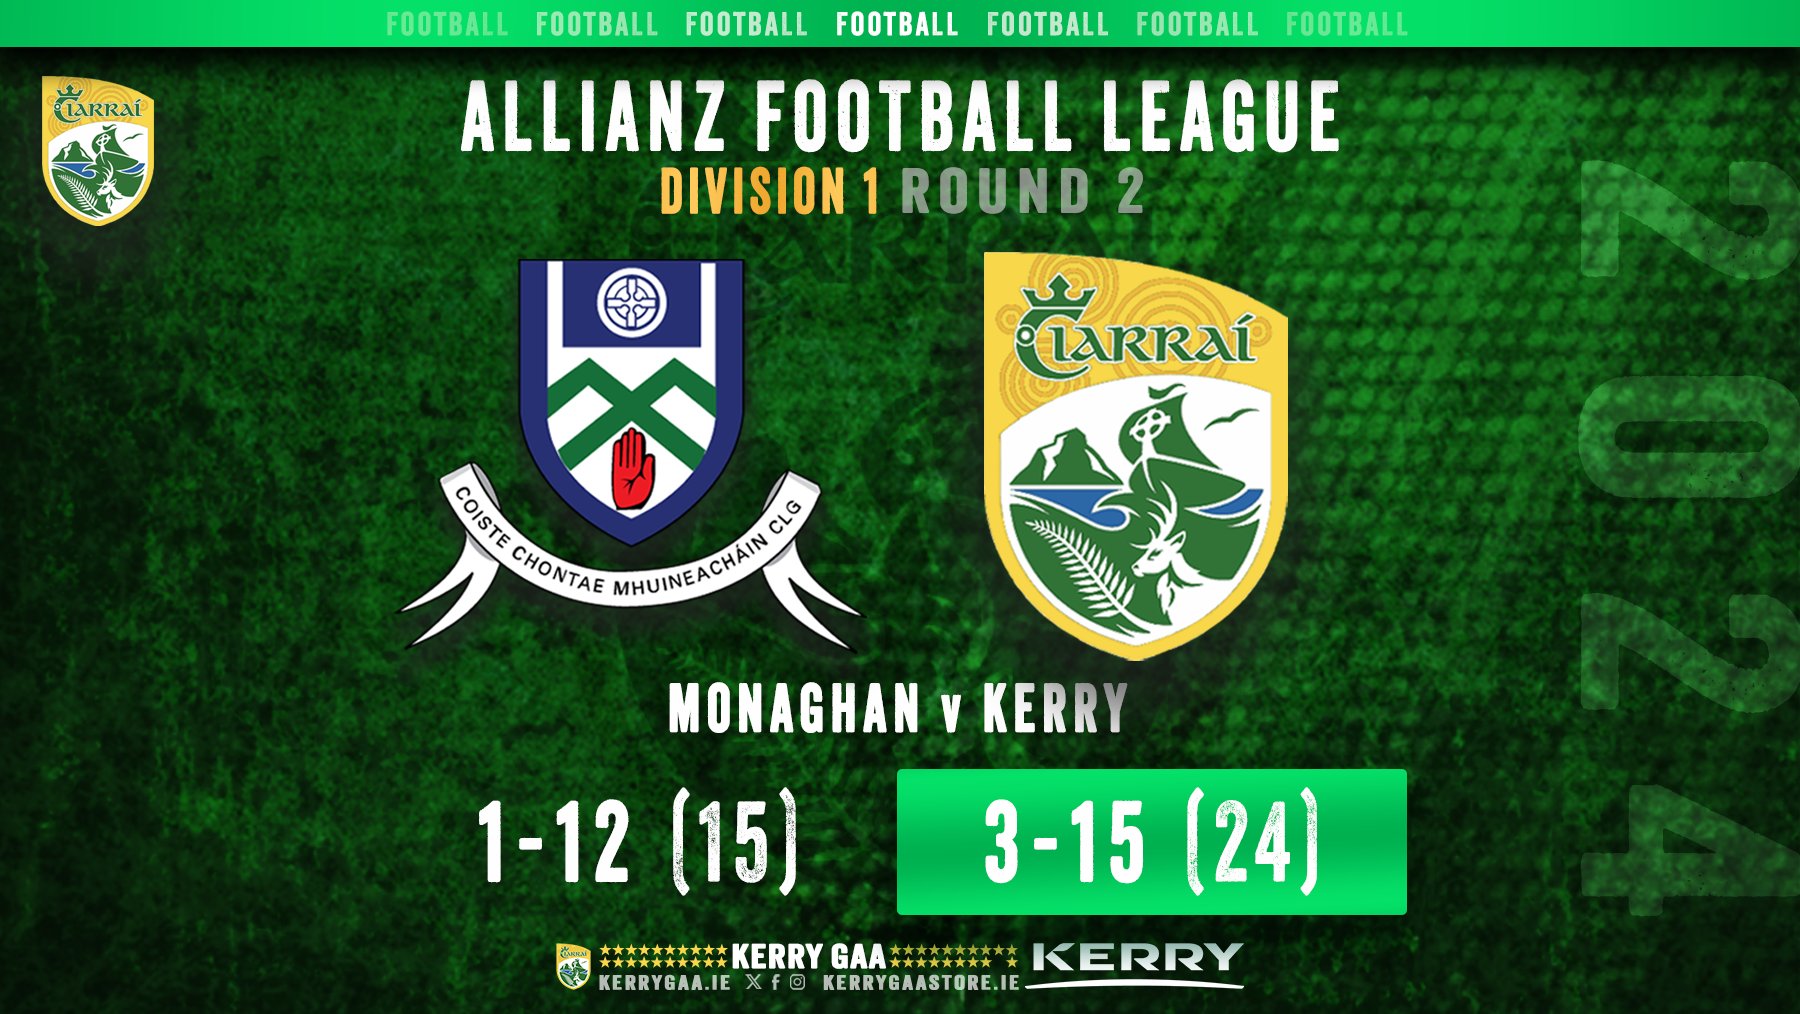 A Win for Kerry over Monaghan in AFL